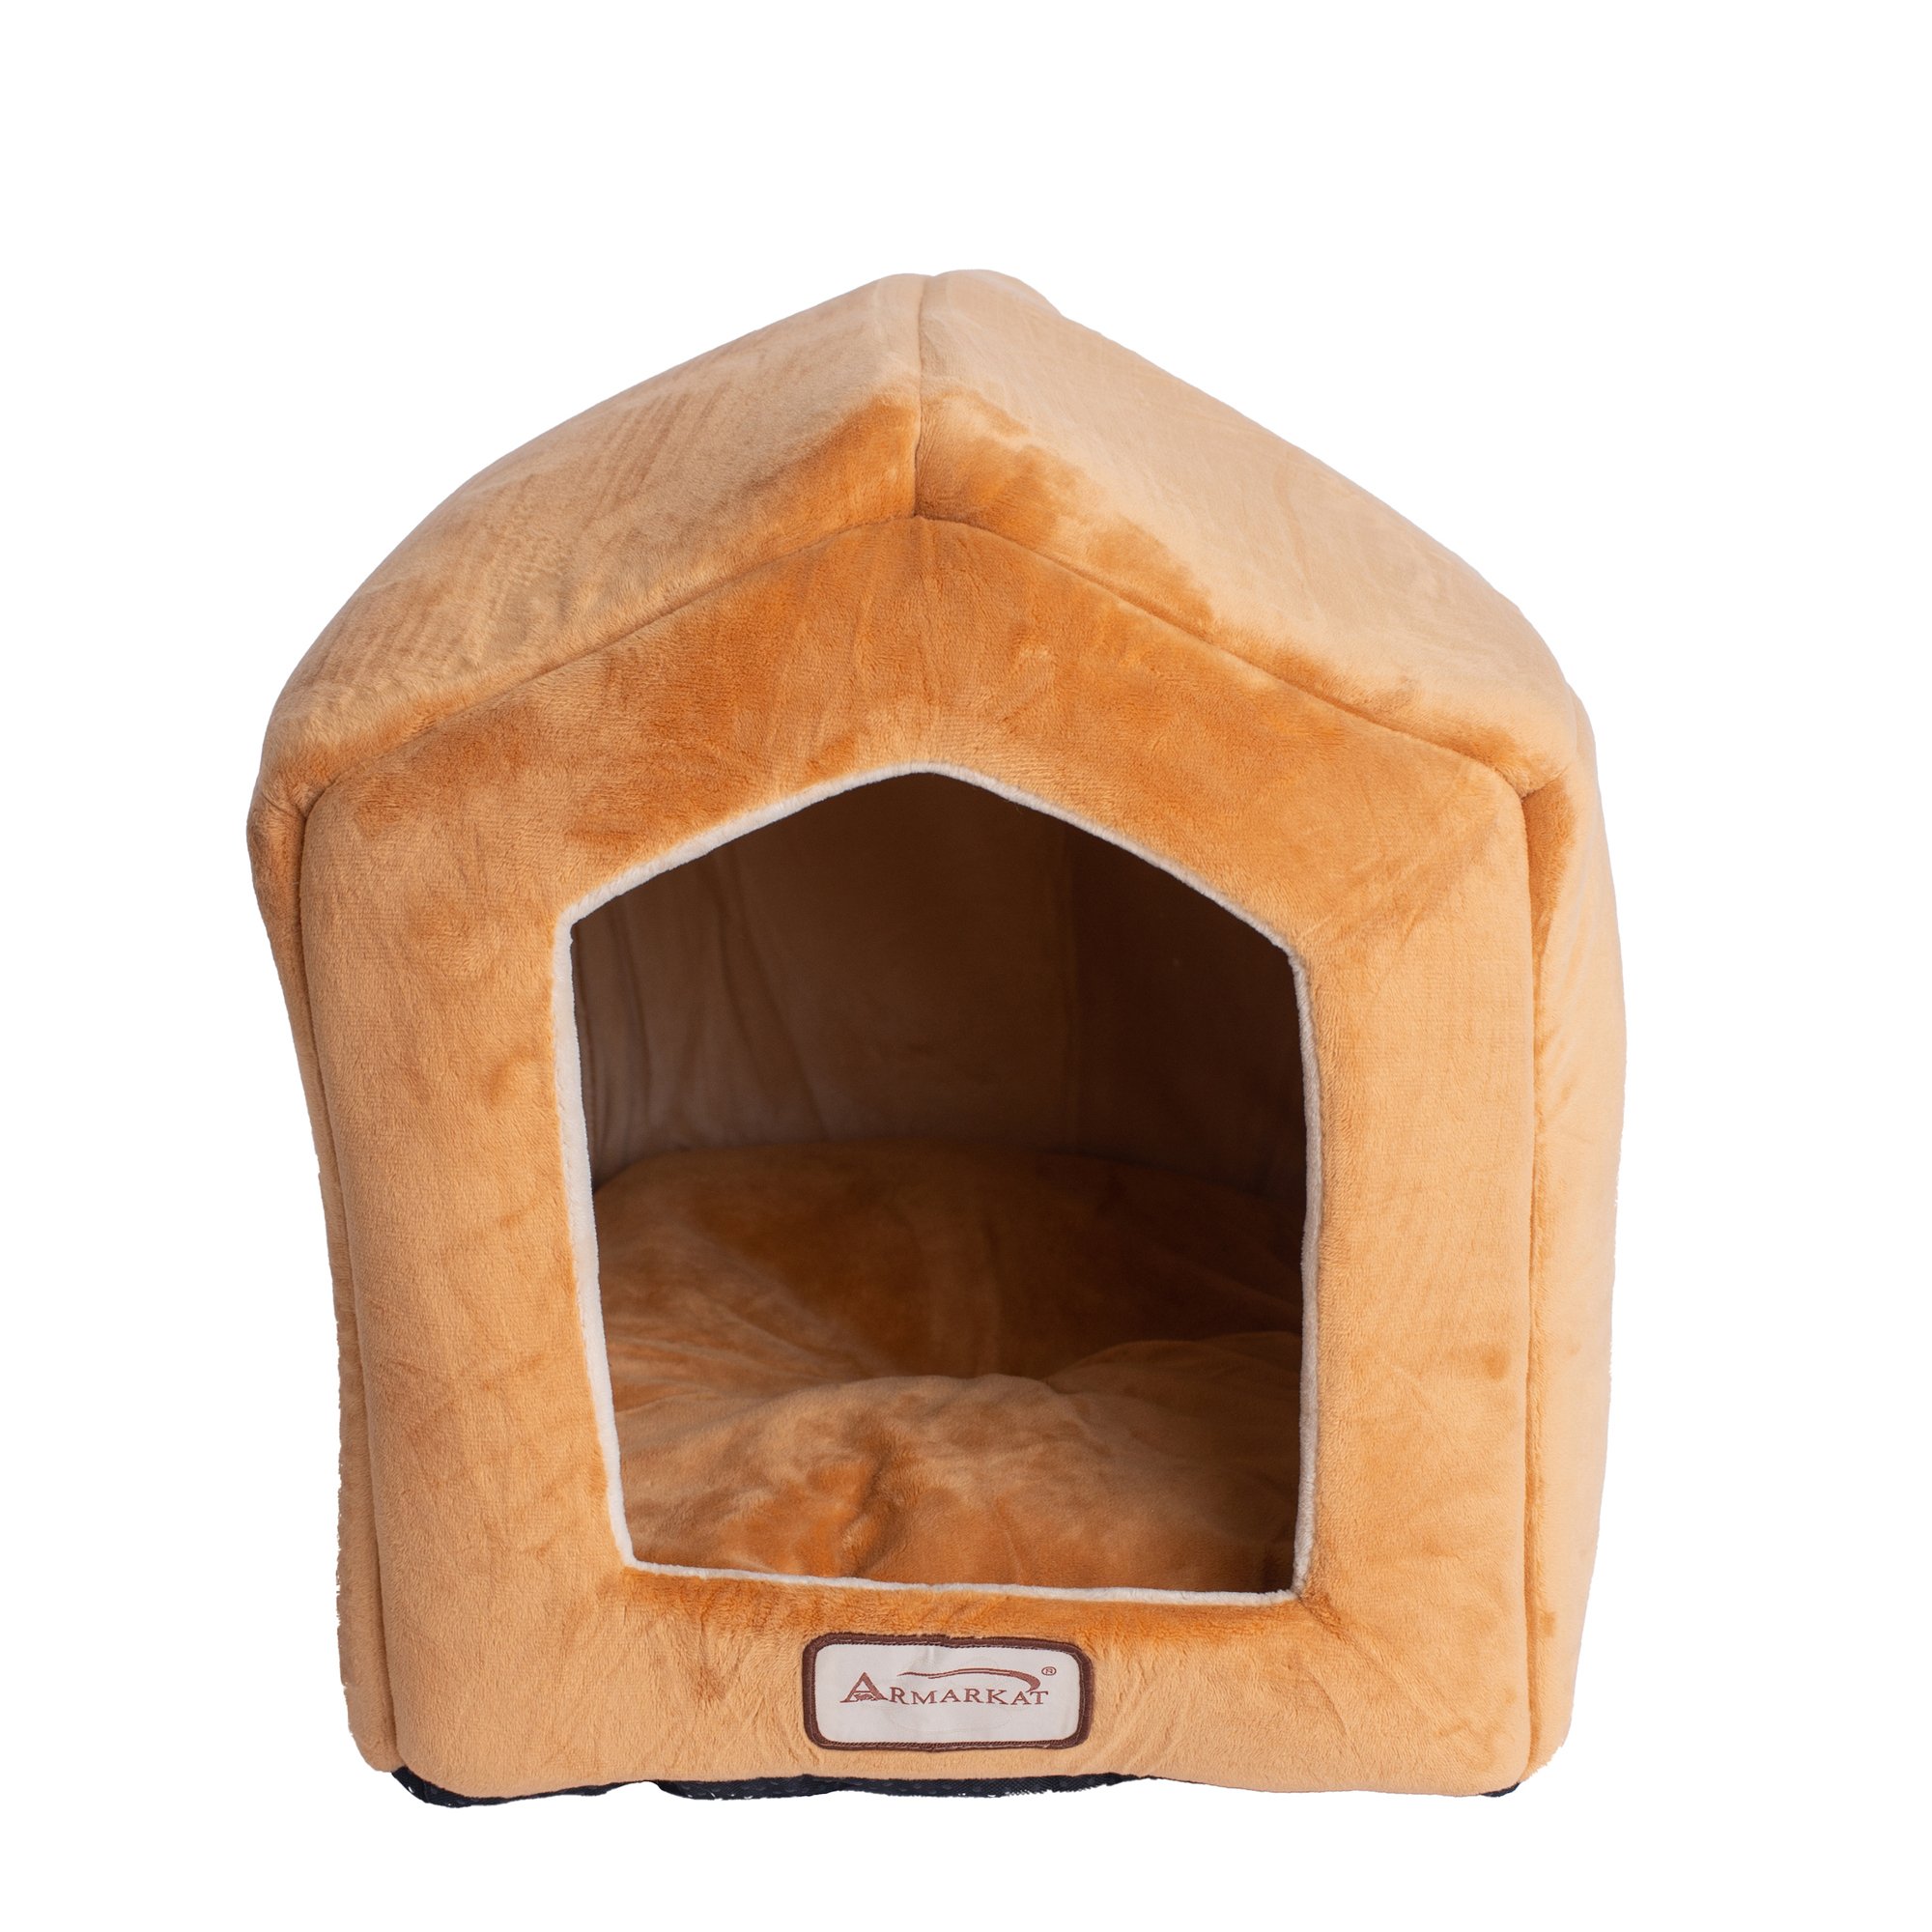 Picture of Aeromark C27CZS-MH Armarkat Pet Bed 18 x 15 x 14 - Brown & Beige